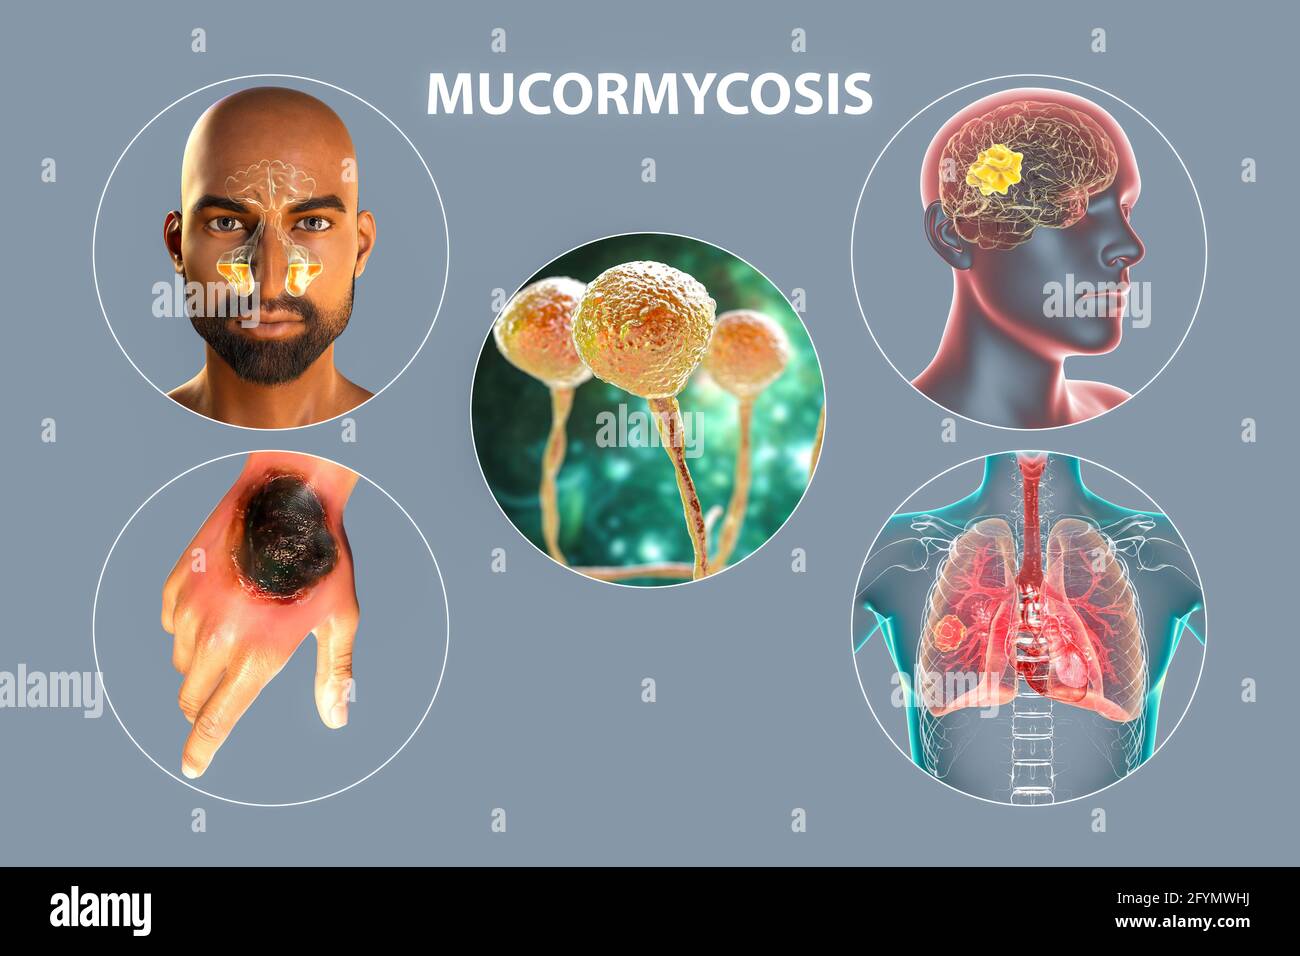 Clinical forms of mucormycosis, illustration Stock Photo